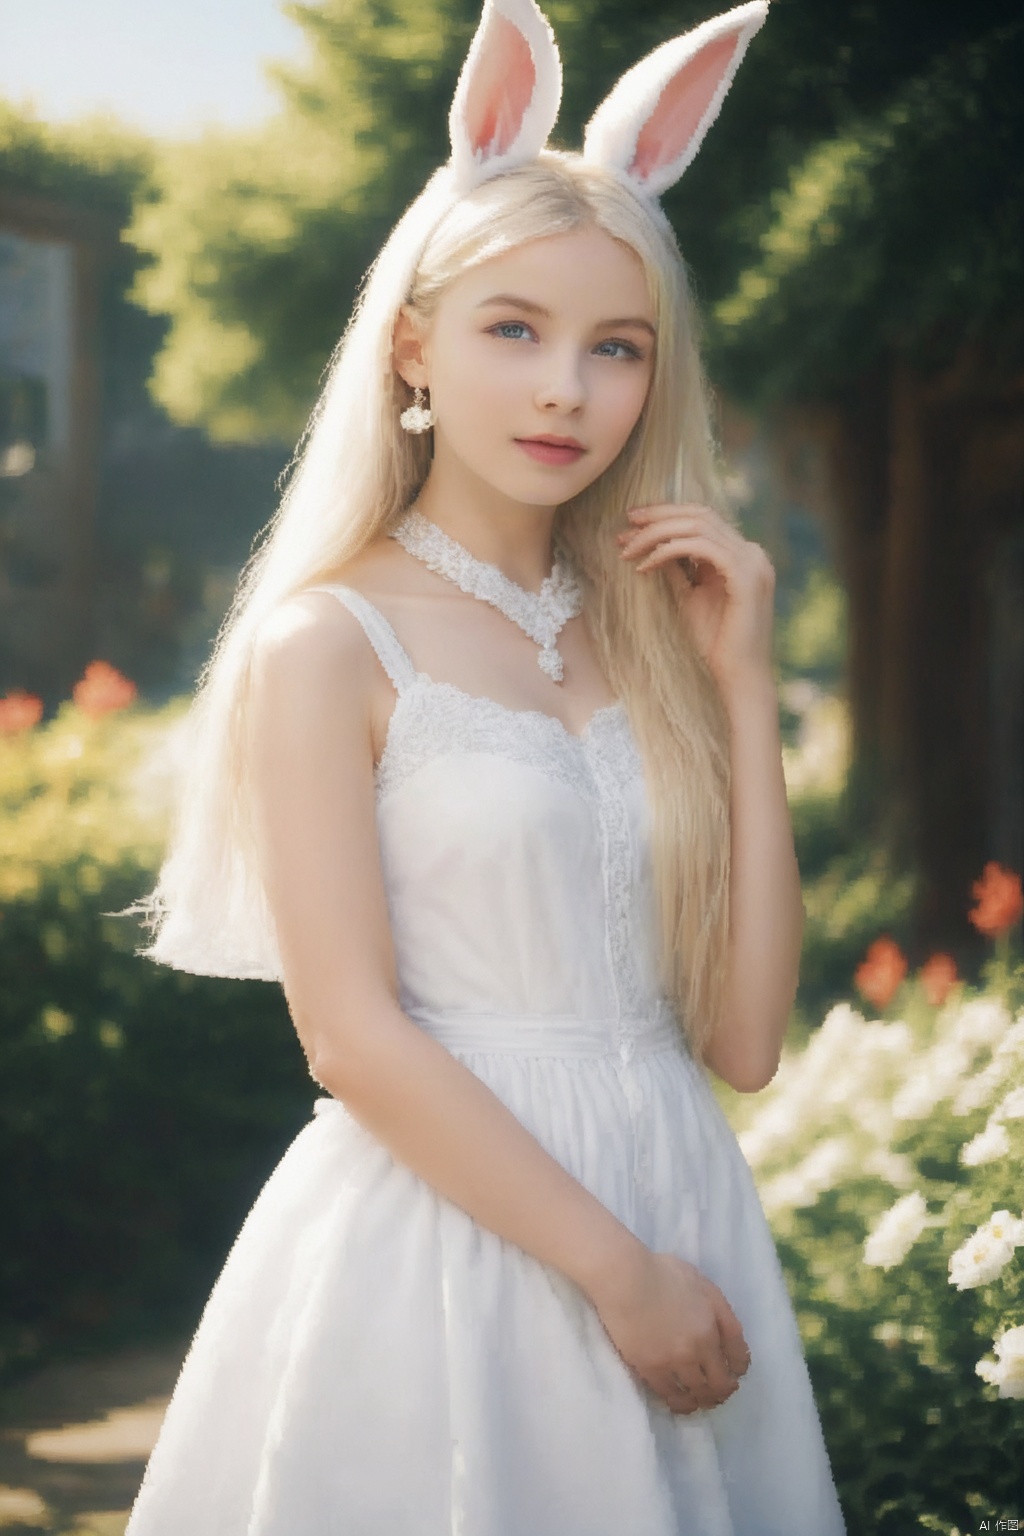 masterpiece, A lovely girl, Rabbit ear, Cartoon style, Delicate eyes, Shiny lipstick, Dressed in a gorgeous lolita, Outdoors in the garden, There is plenty of sunshine, White flowers, Pixel painting